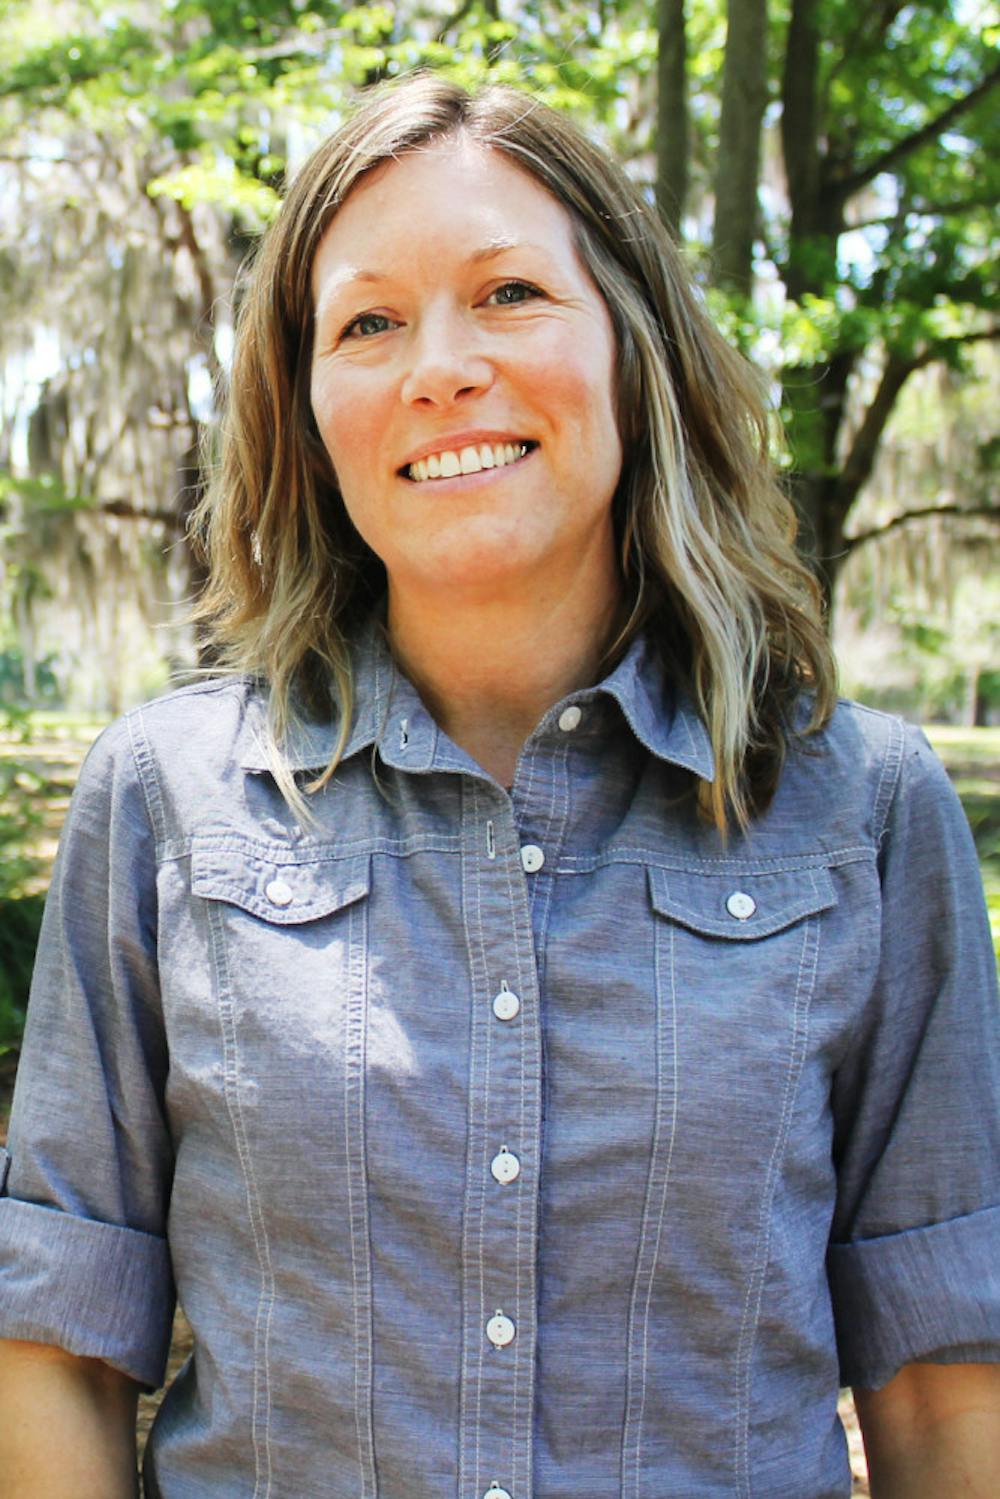 <p>Laura Kalt, an Alachua County victim advocate counselor, will receive the “Victim Advocate of the Year Award” for her work on the Aguilar case.</p>